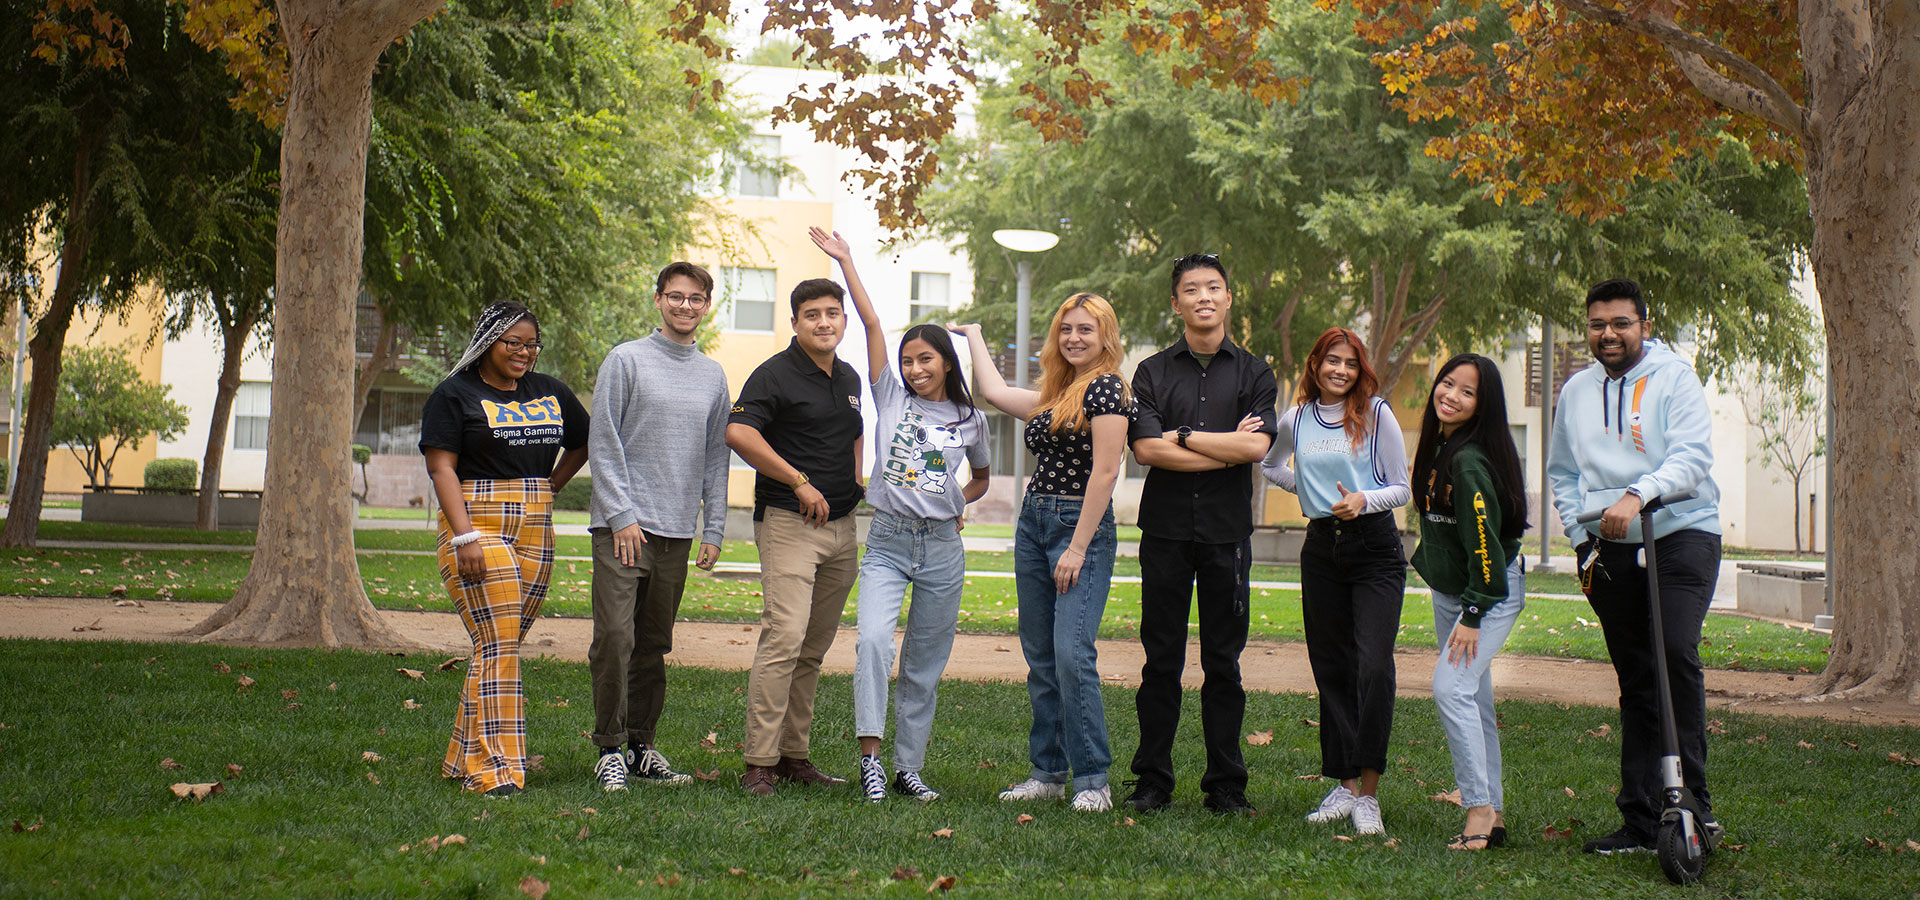 A group of students pose for a photo on grass.